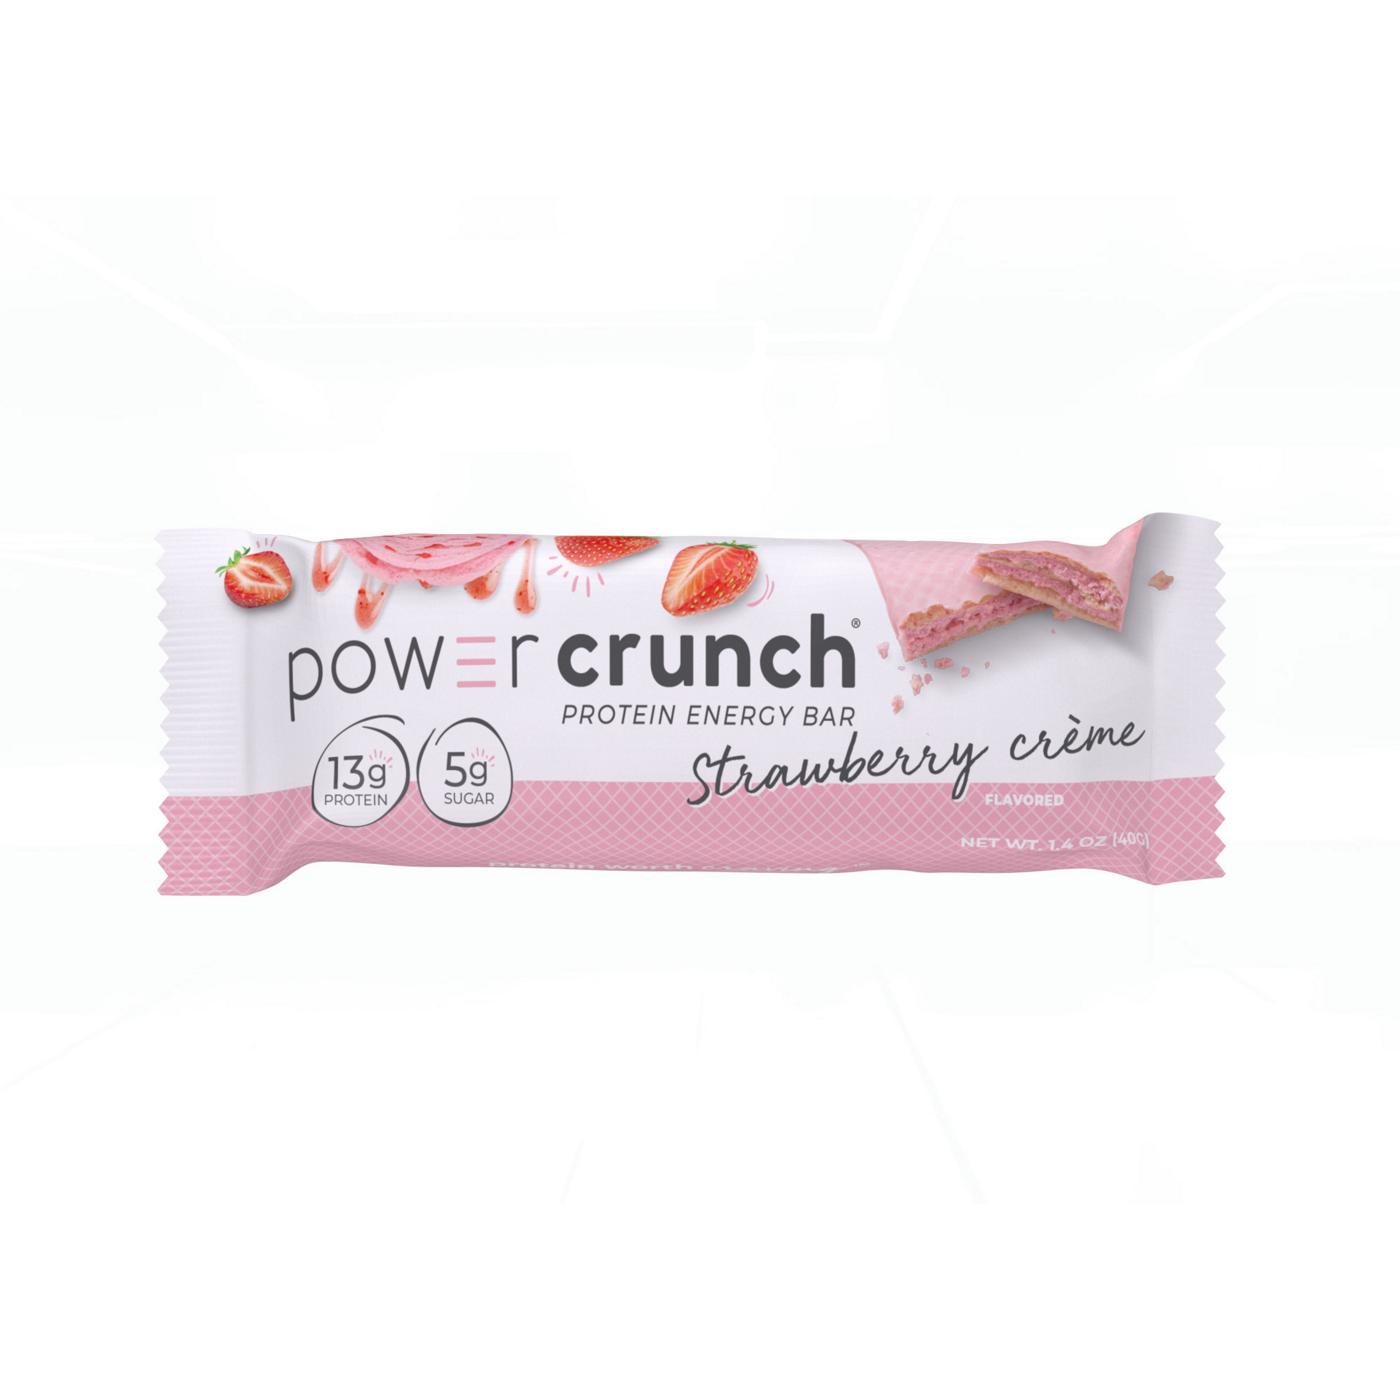 Power Crunch 13g Protein Energy Bar - Strawberry Crème; image 1 of 3